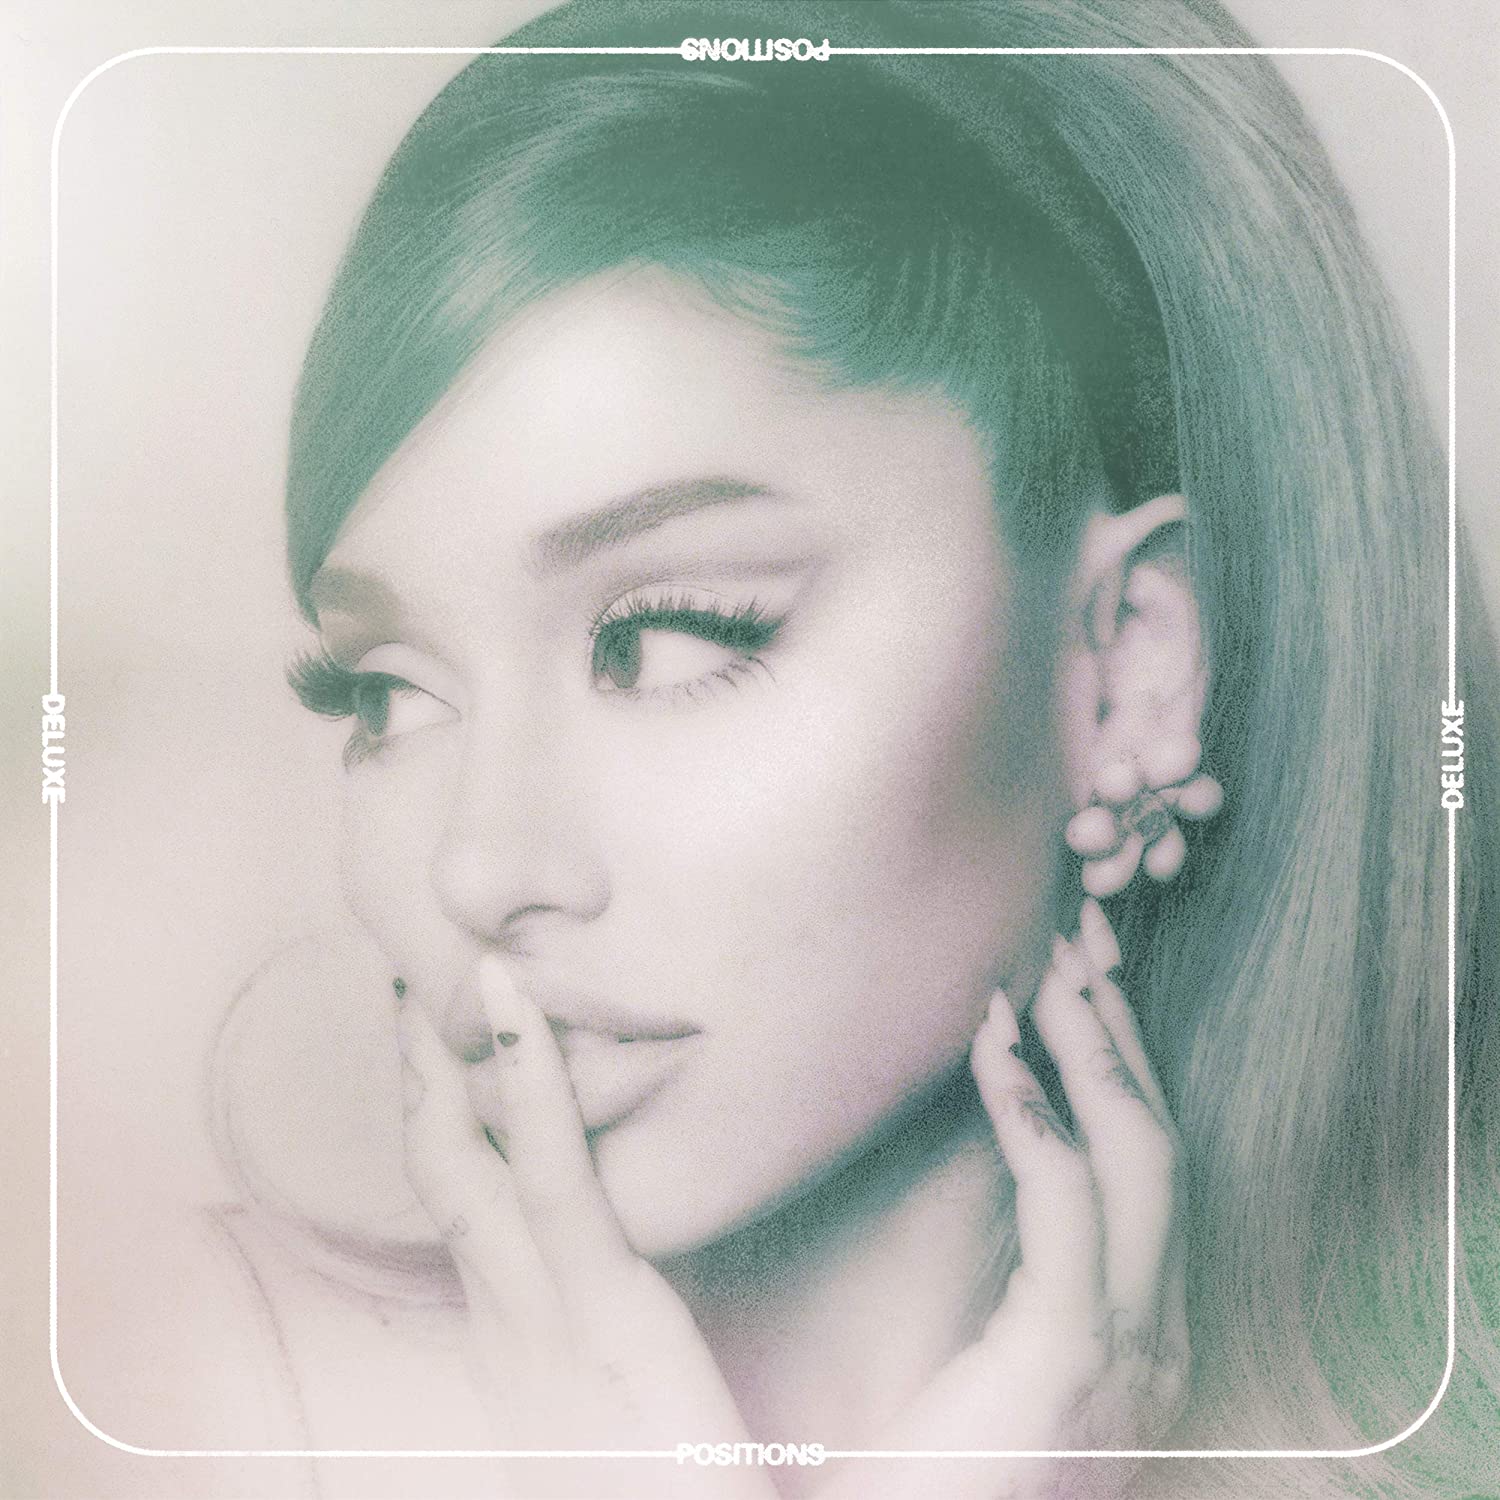 Ariana Grande-Positions-Deluxe Edition-CD-MP3-2021-PERFECT-DDF